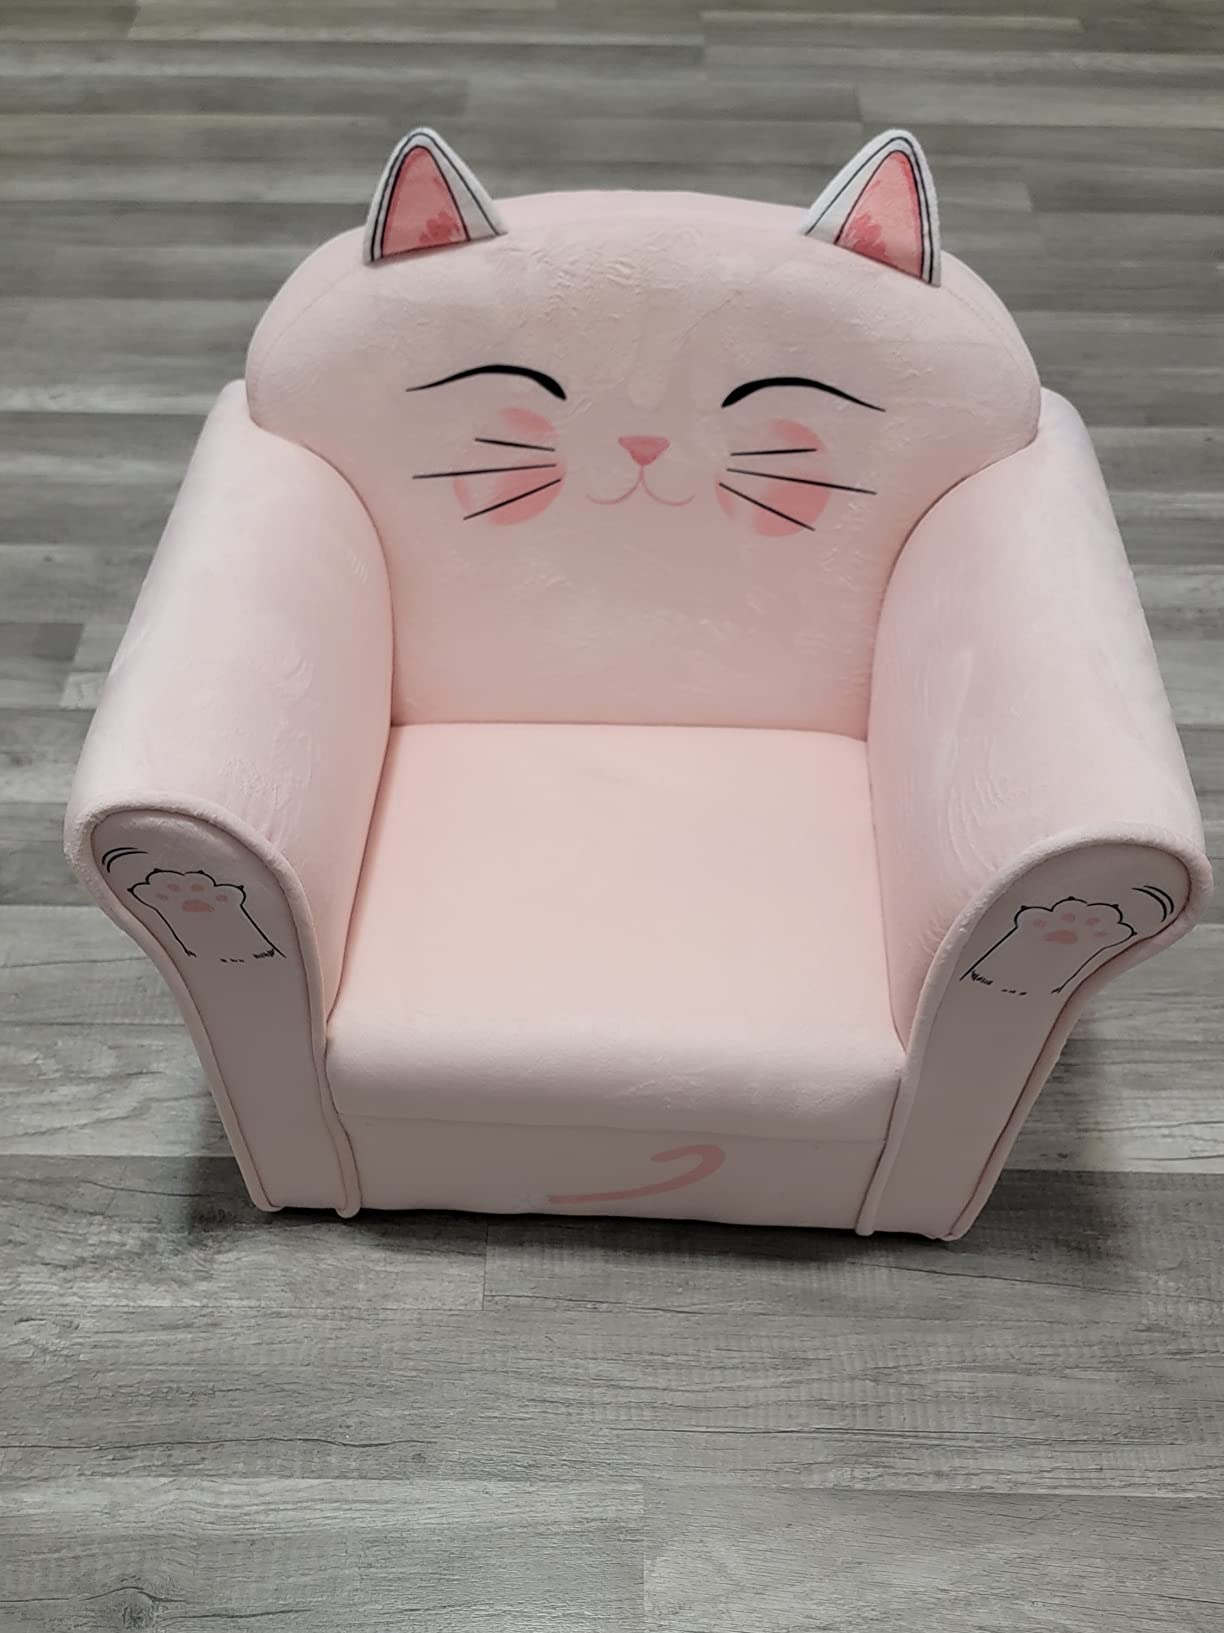 Solid and cute chair